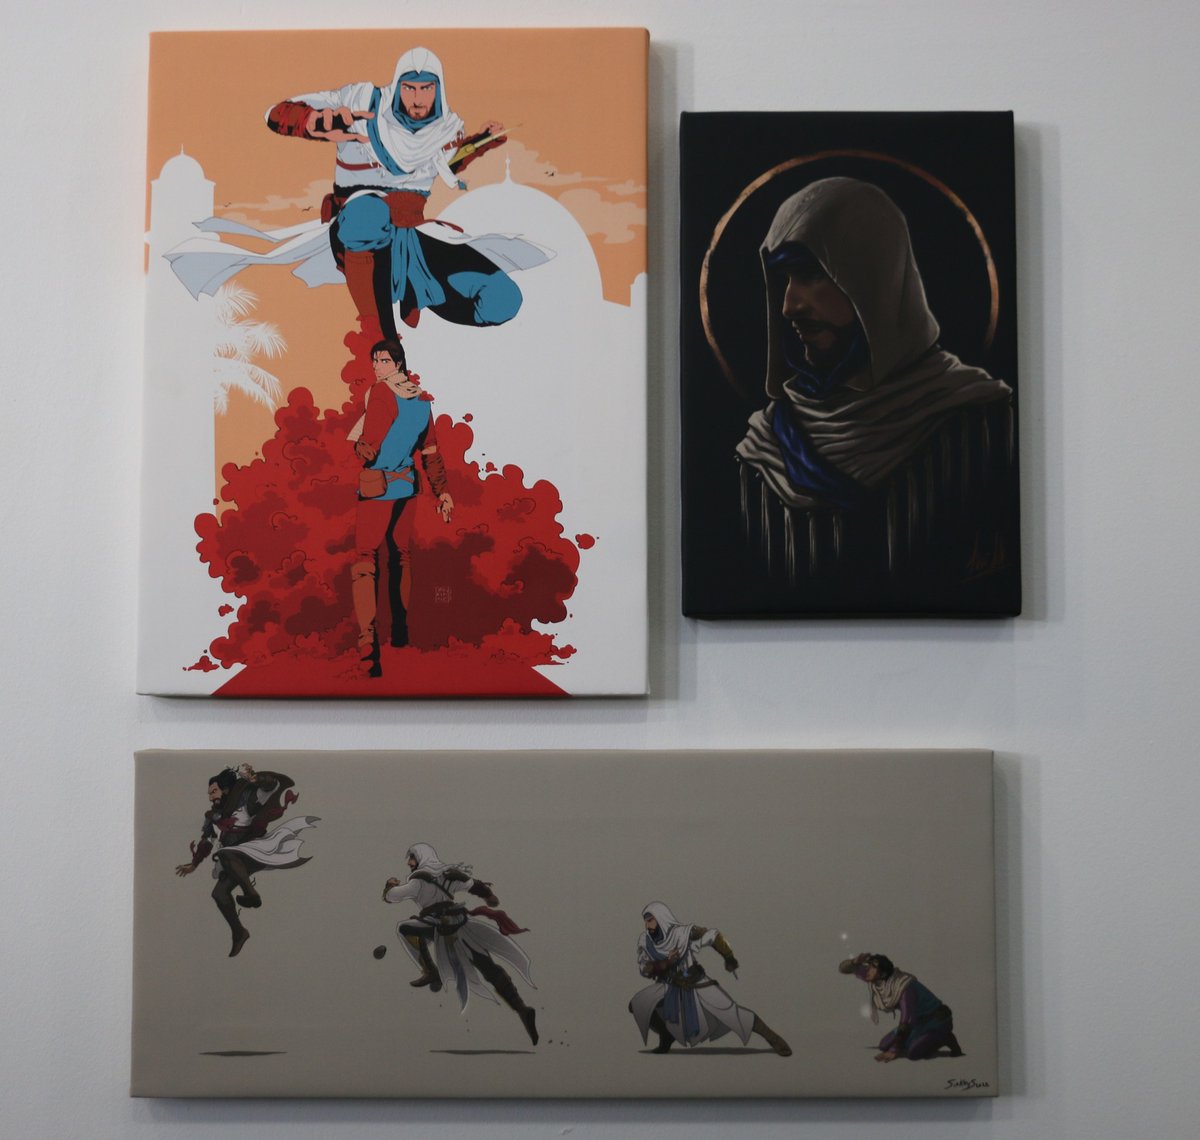 Bringing community art to the walls of Ubisoft Bordeaux 🎨

Check out the winners of a recent Assassin's Creed fanart contest held in partnership with the Access the Animus crew and thanks to everyone who entered!
Artists: @yankikkie, @SixKeysUnlocked and @Angi_AN https://t.co/phpx95JHAR